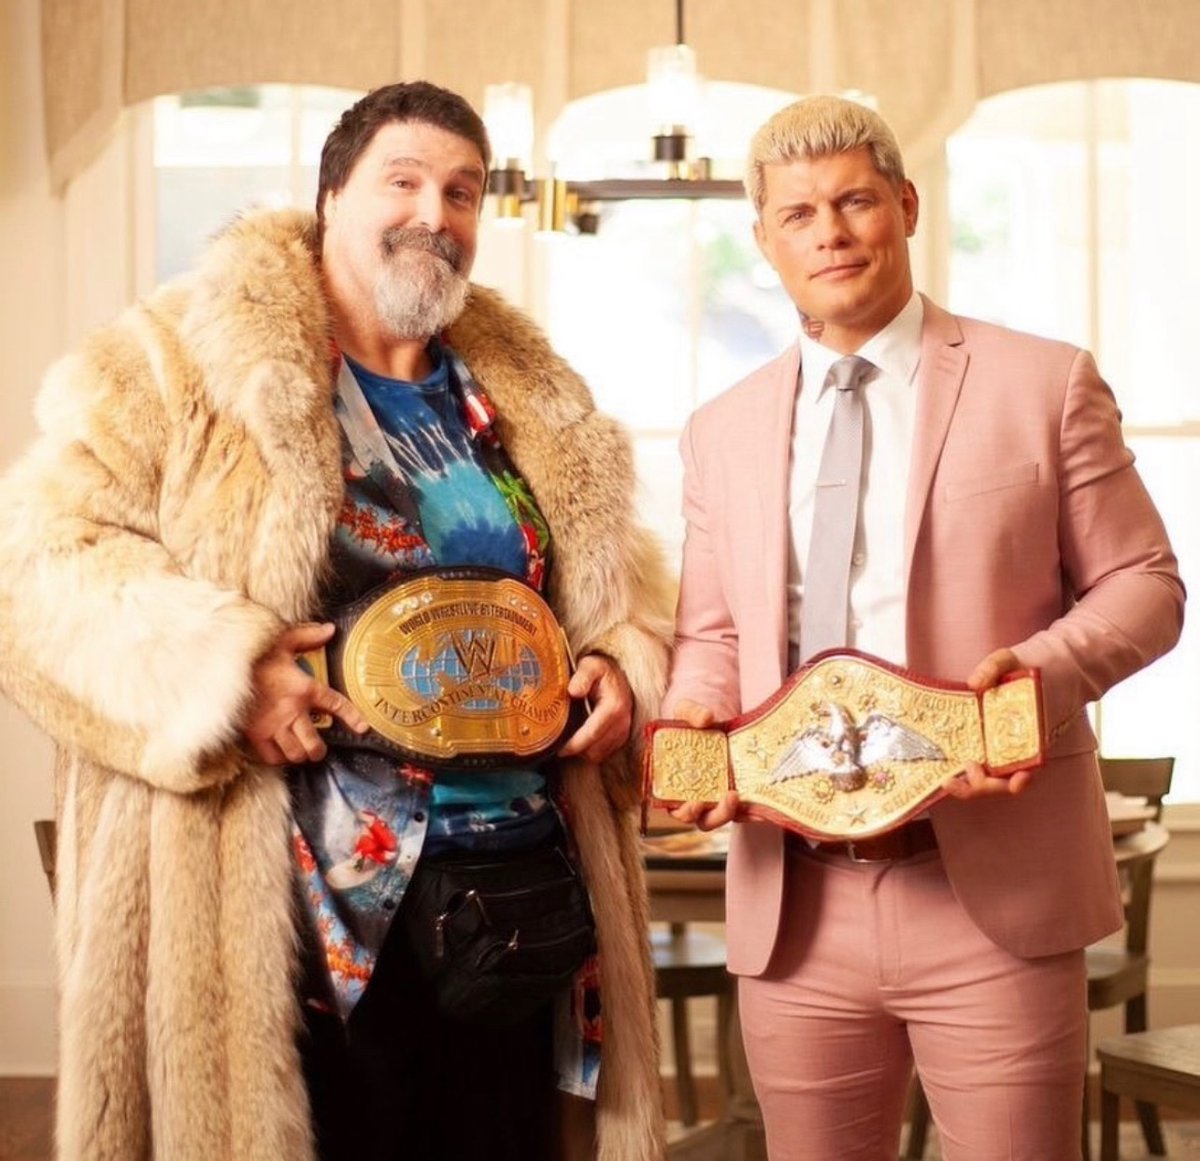 Mick Foley posing with Cody Rhodes and wearing Dusty Rhodes’ famous fur coat